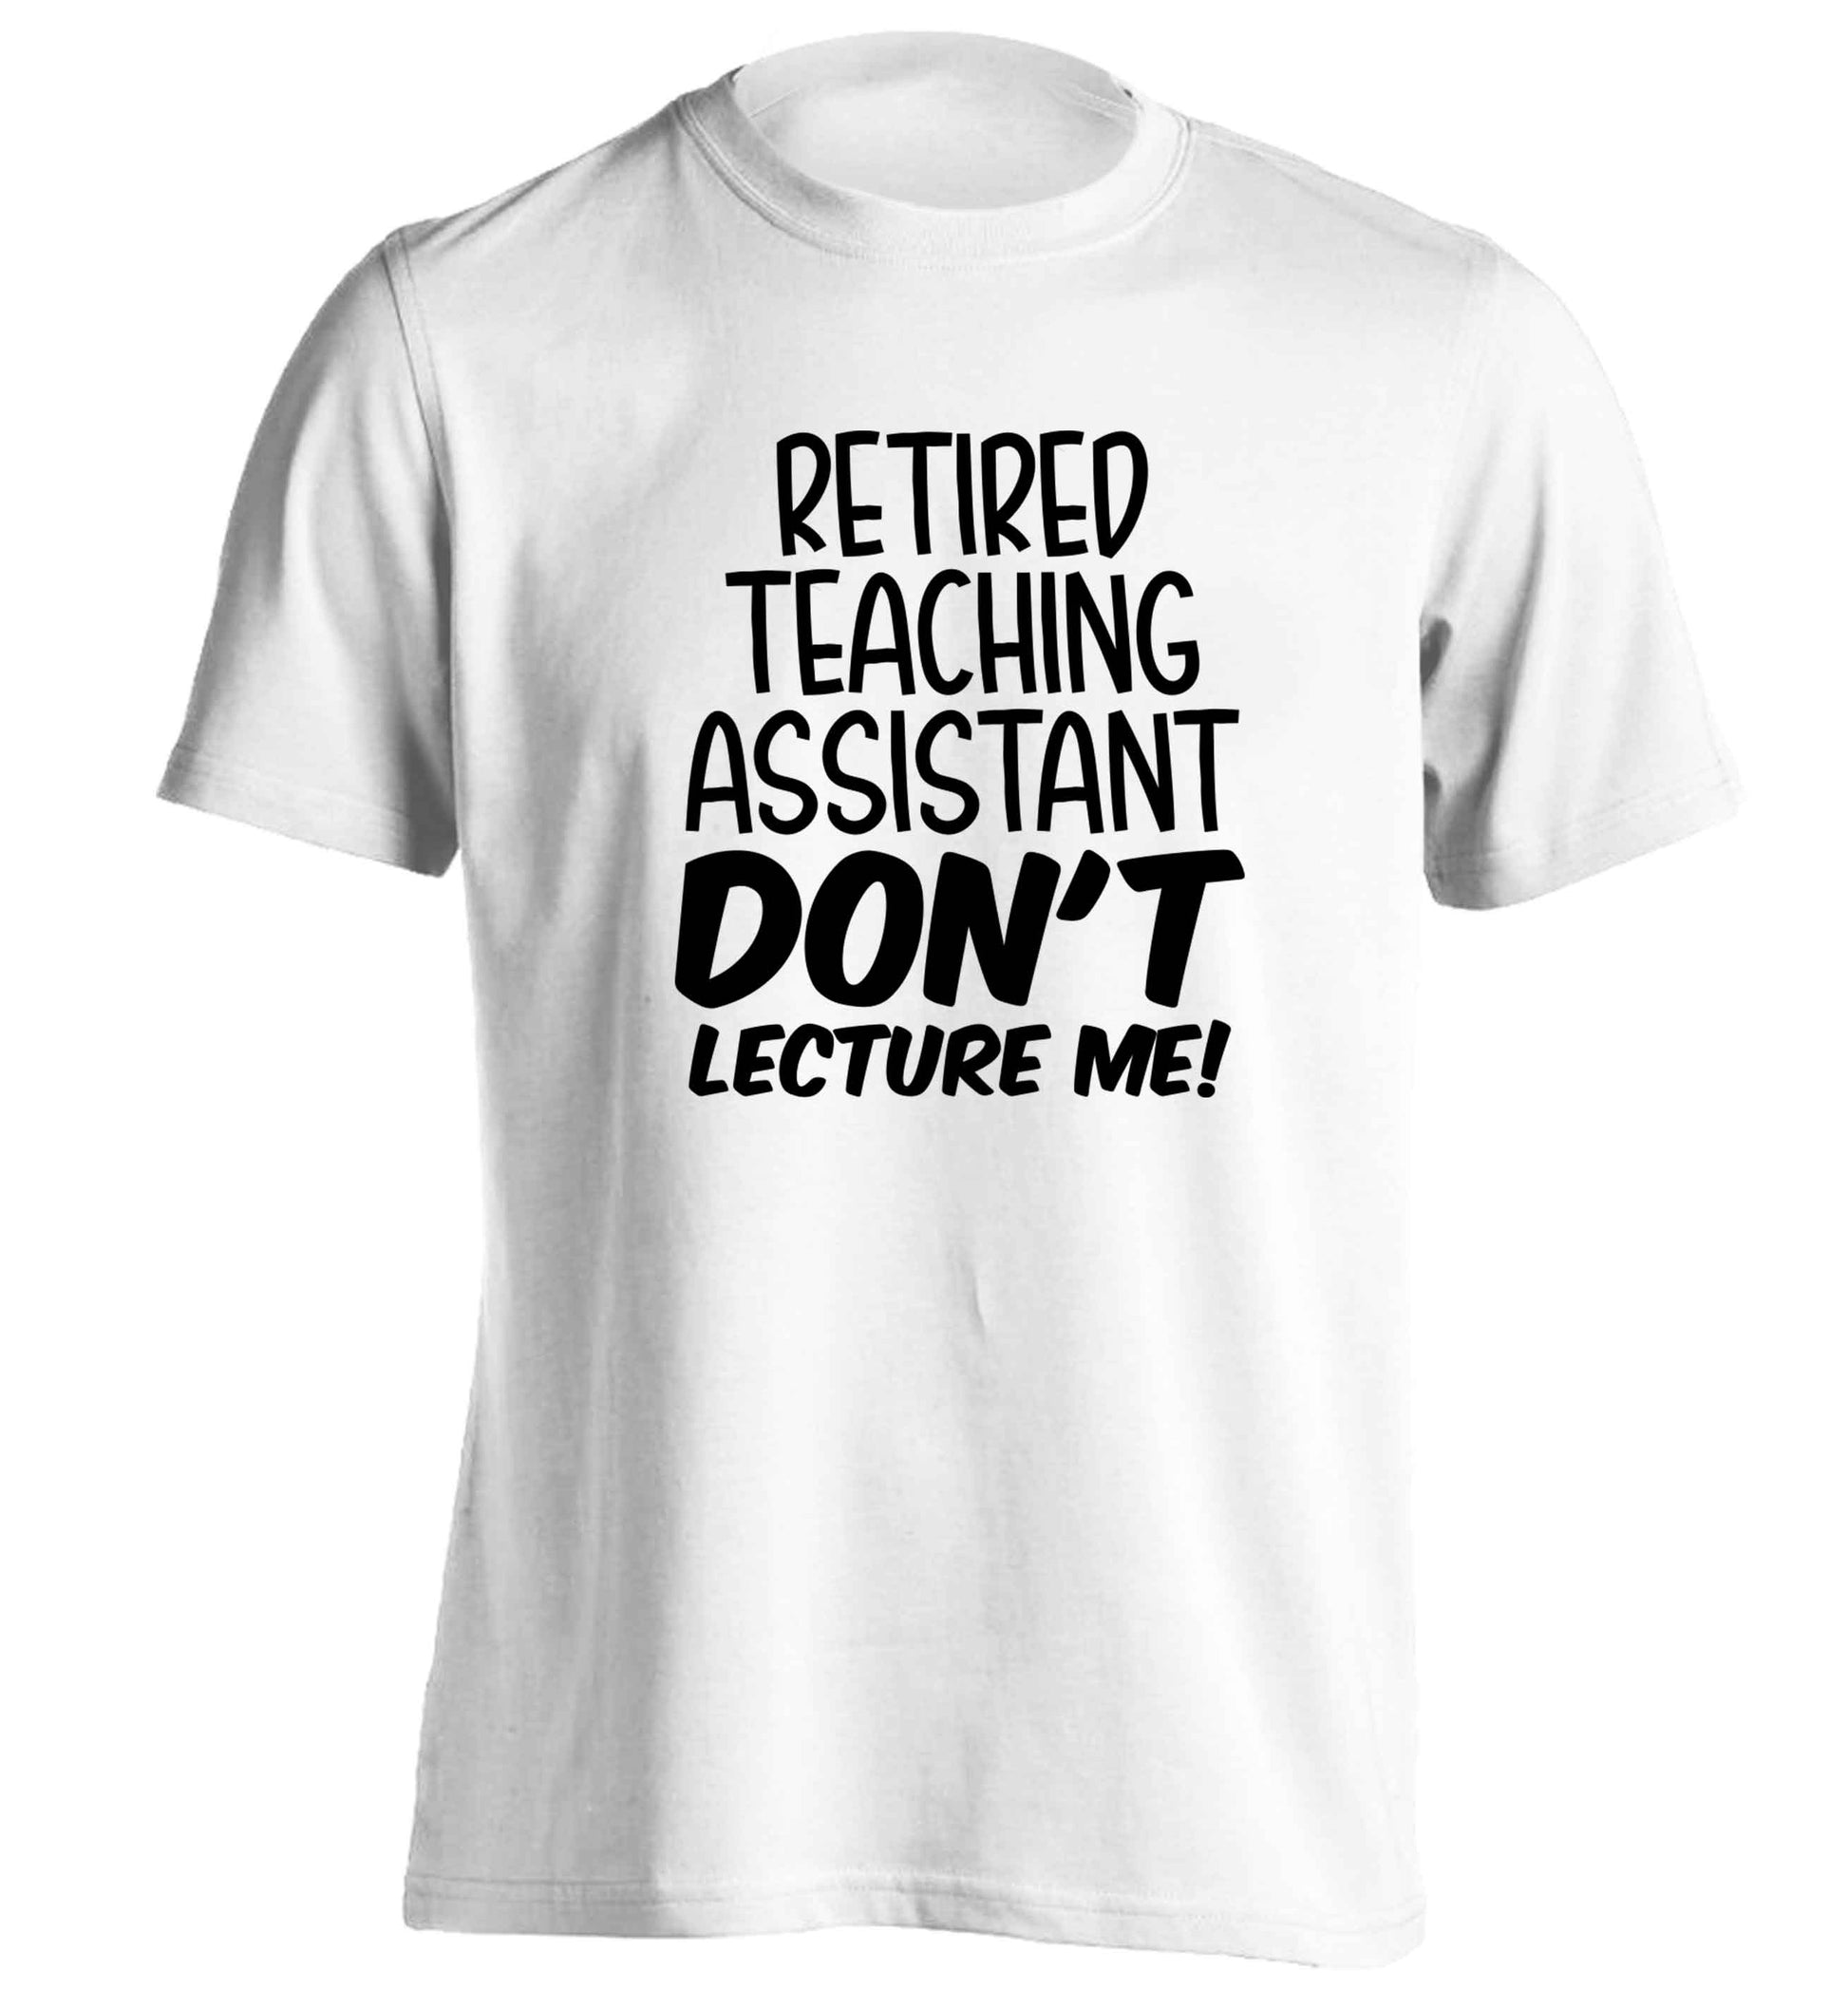 Retired teaching assistant don't lecture me adults unisex white Tshirt 2XL